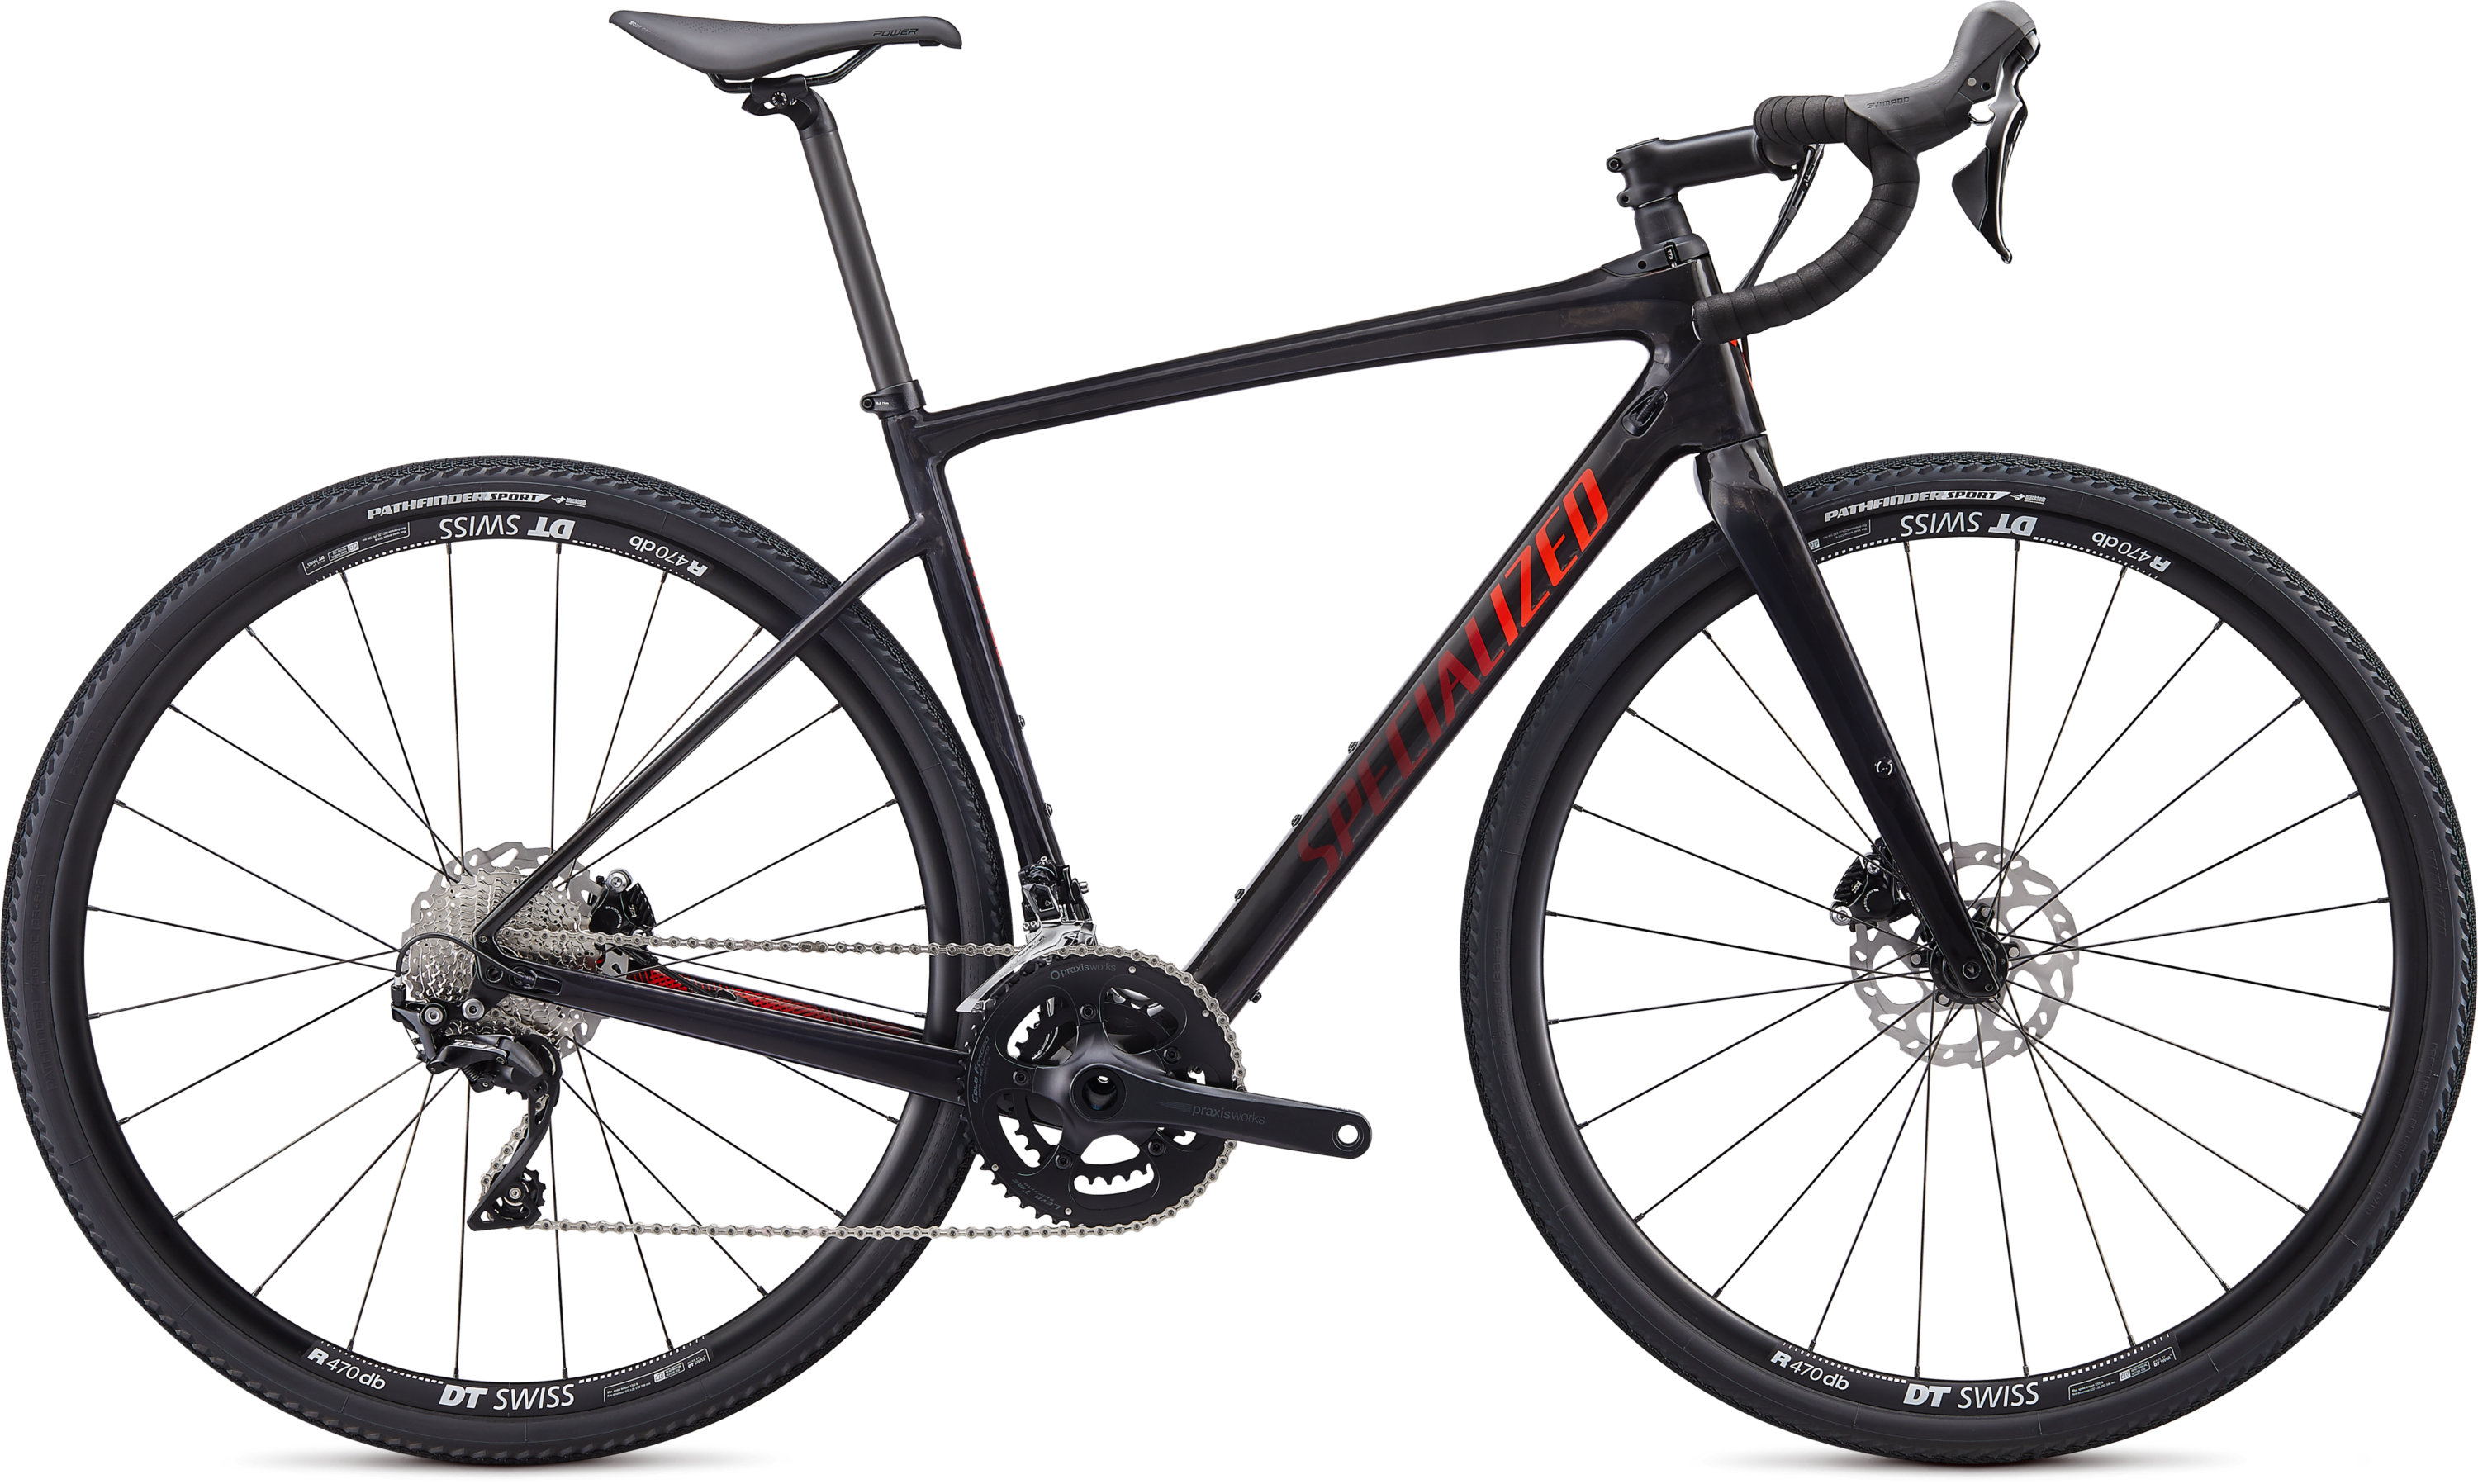 2019 specialized diverge